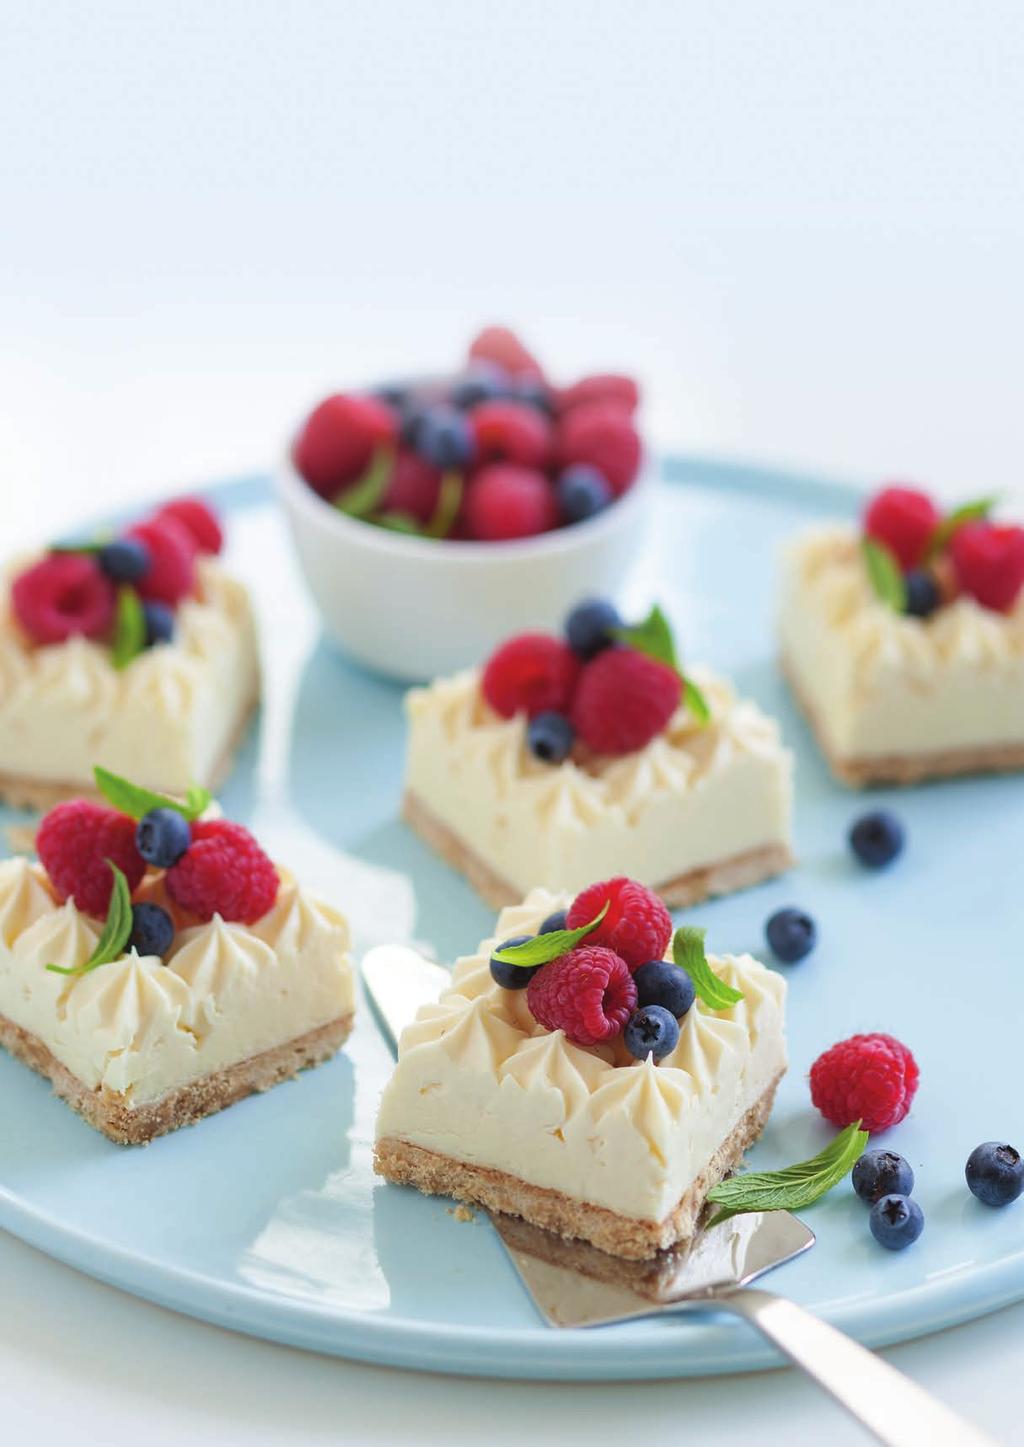 Cheesecakes At the heart of every Sara Lee Cheesecake is Neufchatel cheese that adds tang and lightness. Our range of 6 guarantees variety on your menu.